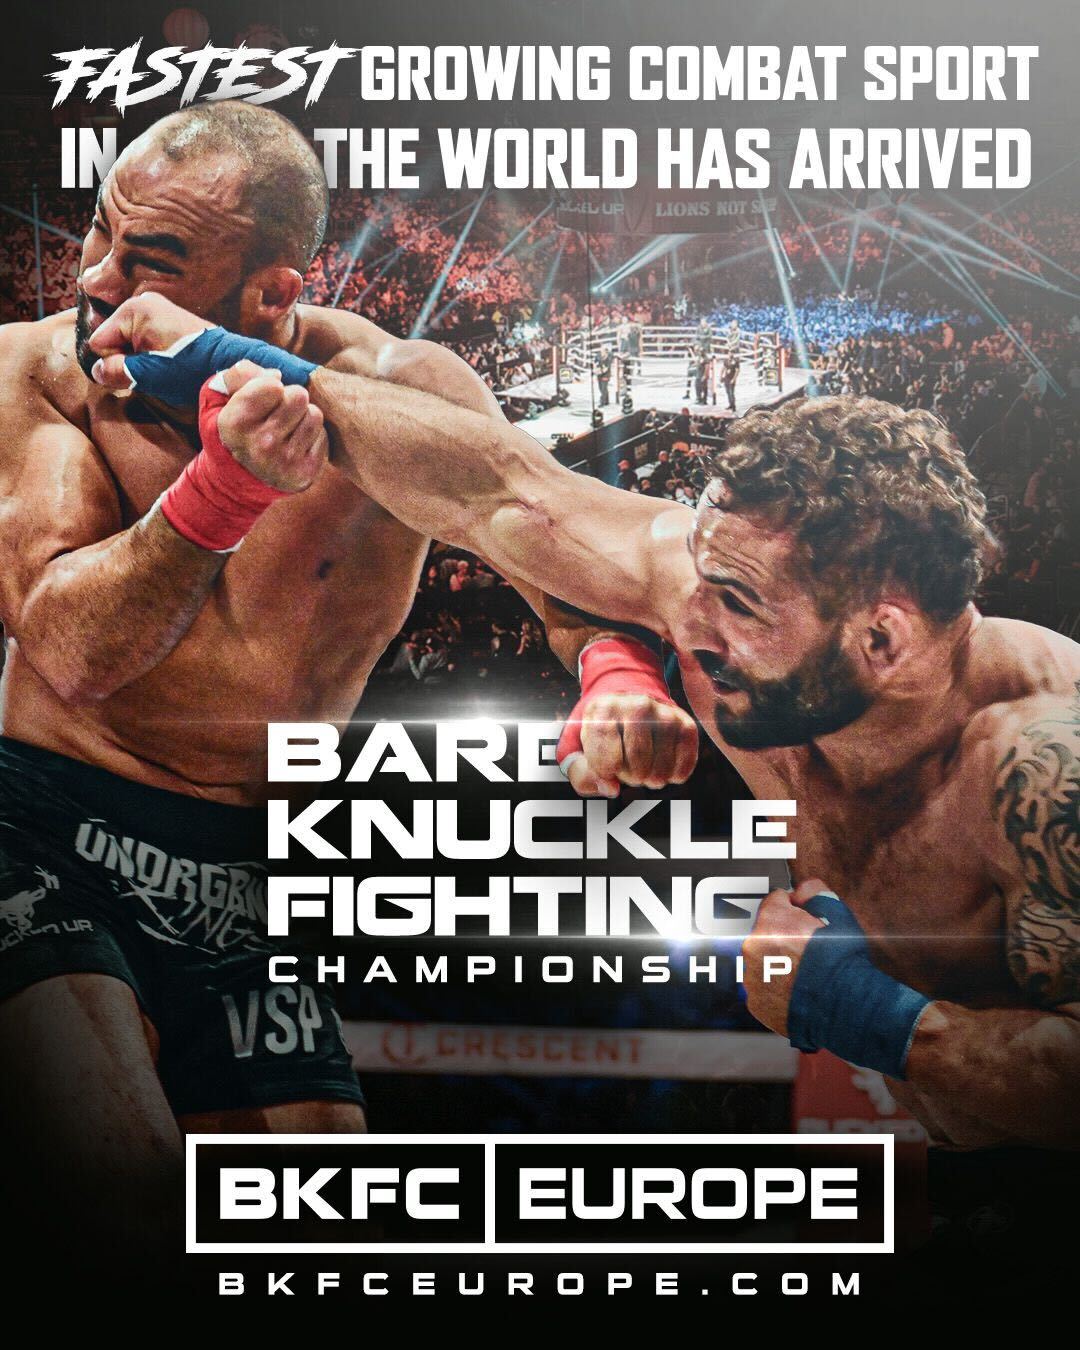 BKFC Europe Bare Knuckle Bare Knuckle Fighting Championship